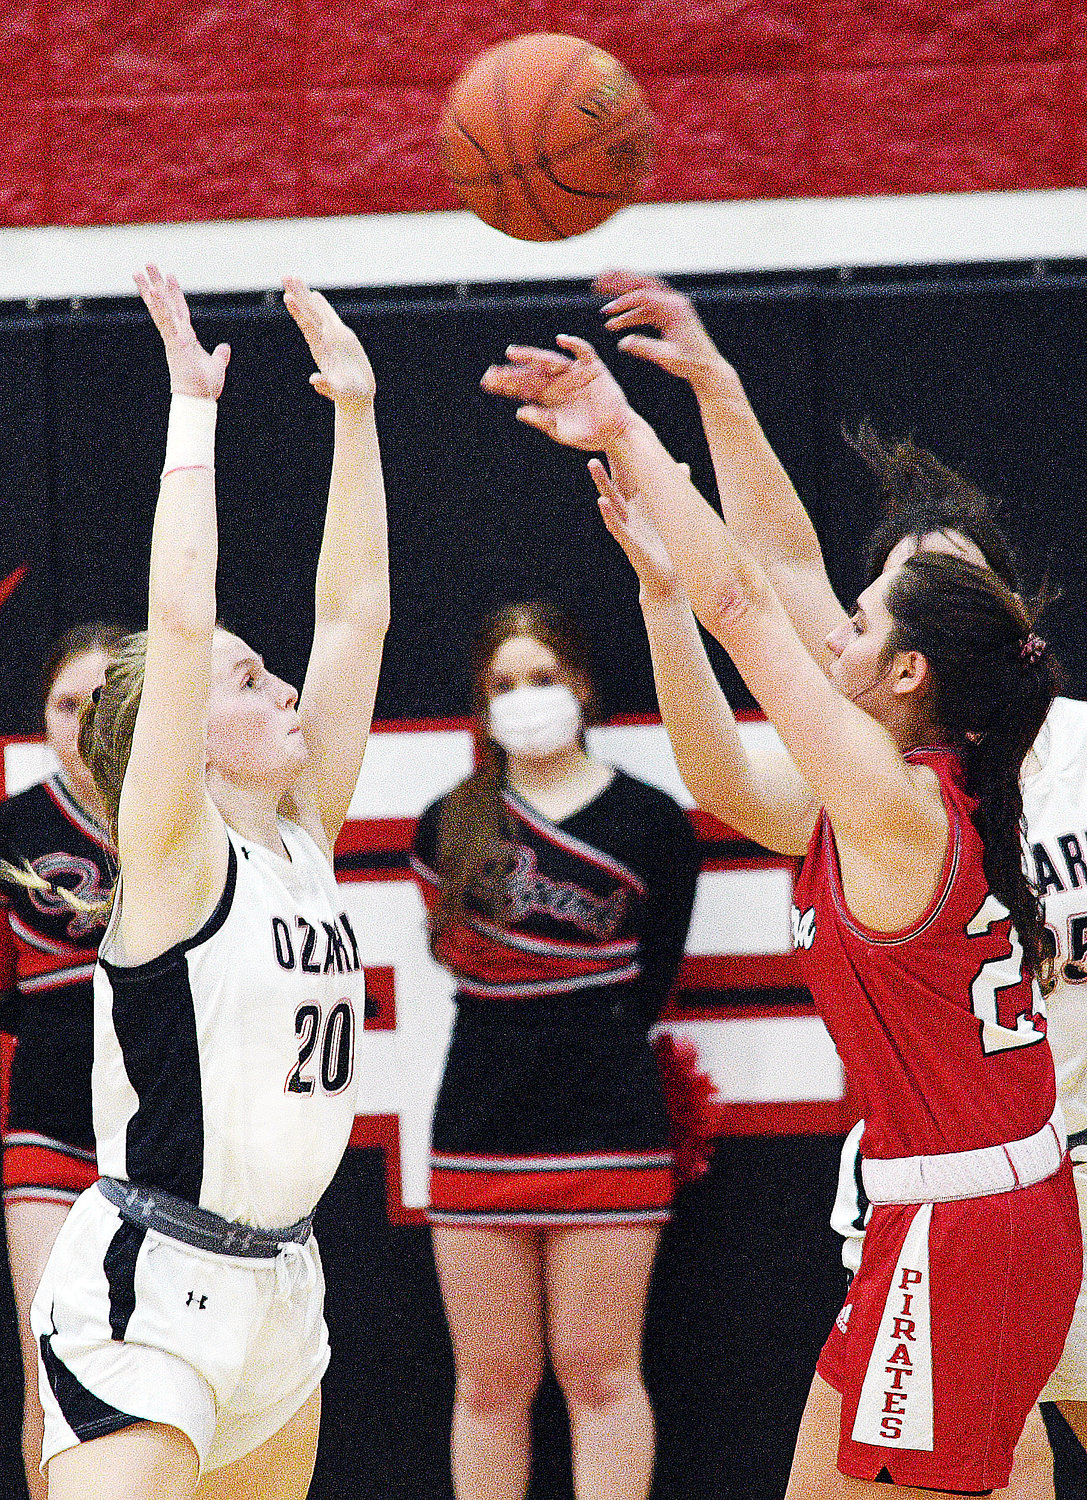 MOLLY RUSHING defends a pass to the paint.